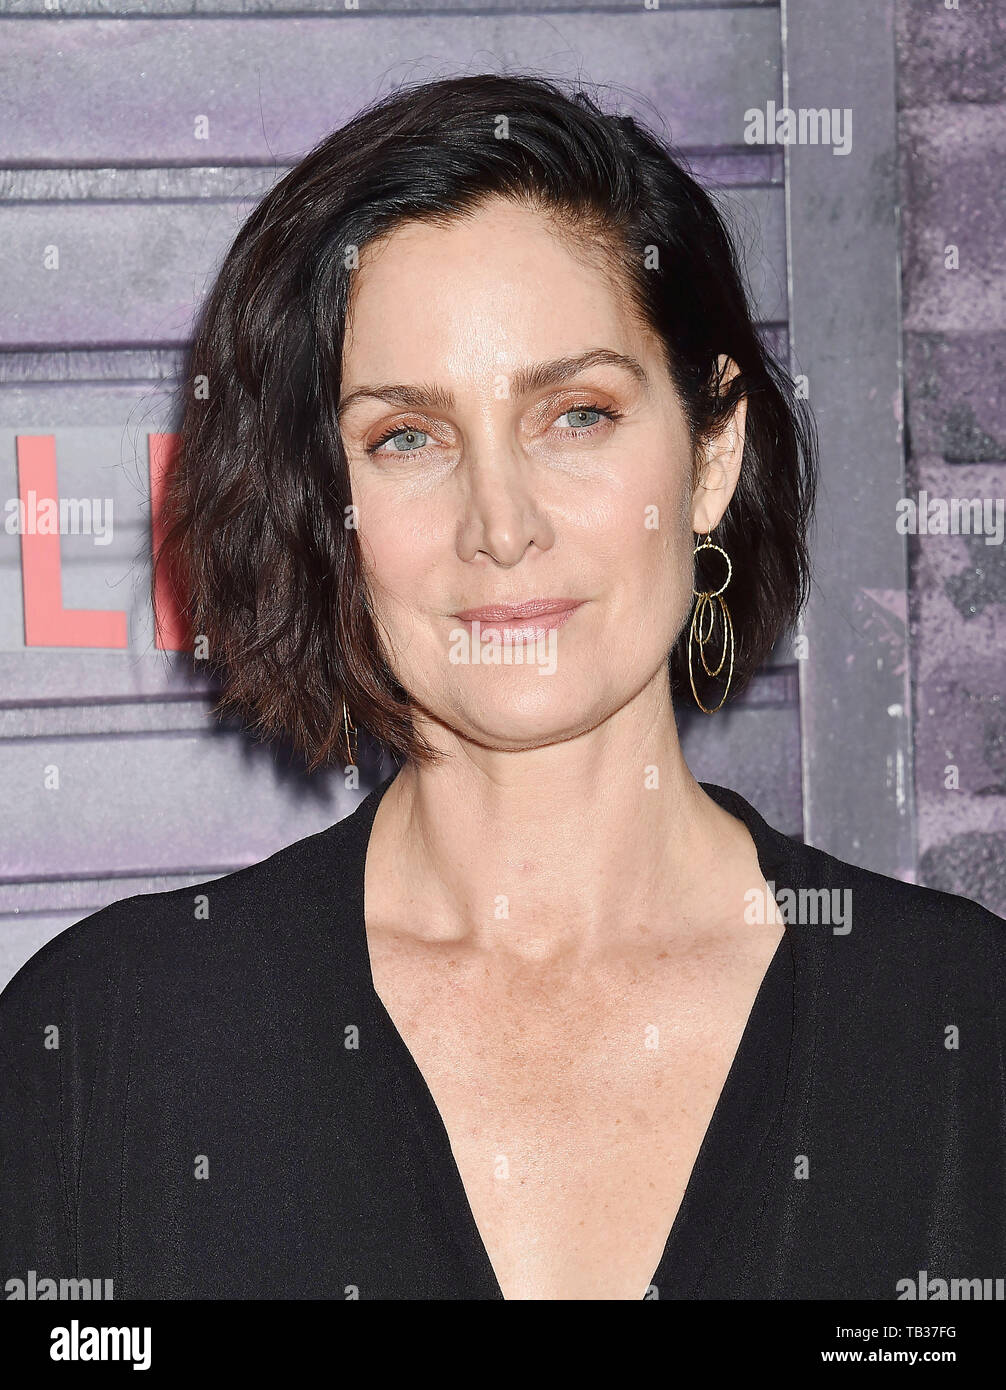 HOLLYWOOD, CA - MAY 28: Carrie-Anne Moss attends a Special Screening Of Netflix's 'Jessica Jones' Season 3 at ArcLight Hollywood on May 28, 2019 in Hollywood, California. © Joe Sutter, PacificCoastNews. Los Angeles Office (PCN): +1 310.822.0419 UK Office (Photoshot): +44 (0) 20 7421 6000 sales@pacificcoastnews.com FEE MUST BE AGREED PRIOR TO USAGE Stock Photo